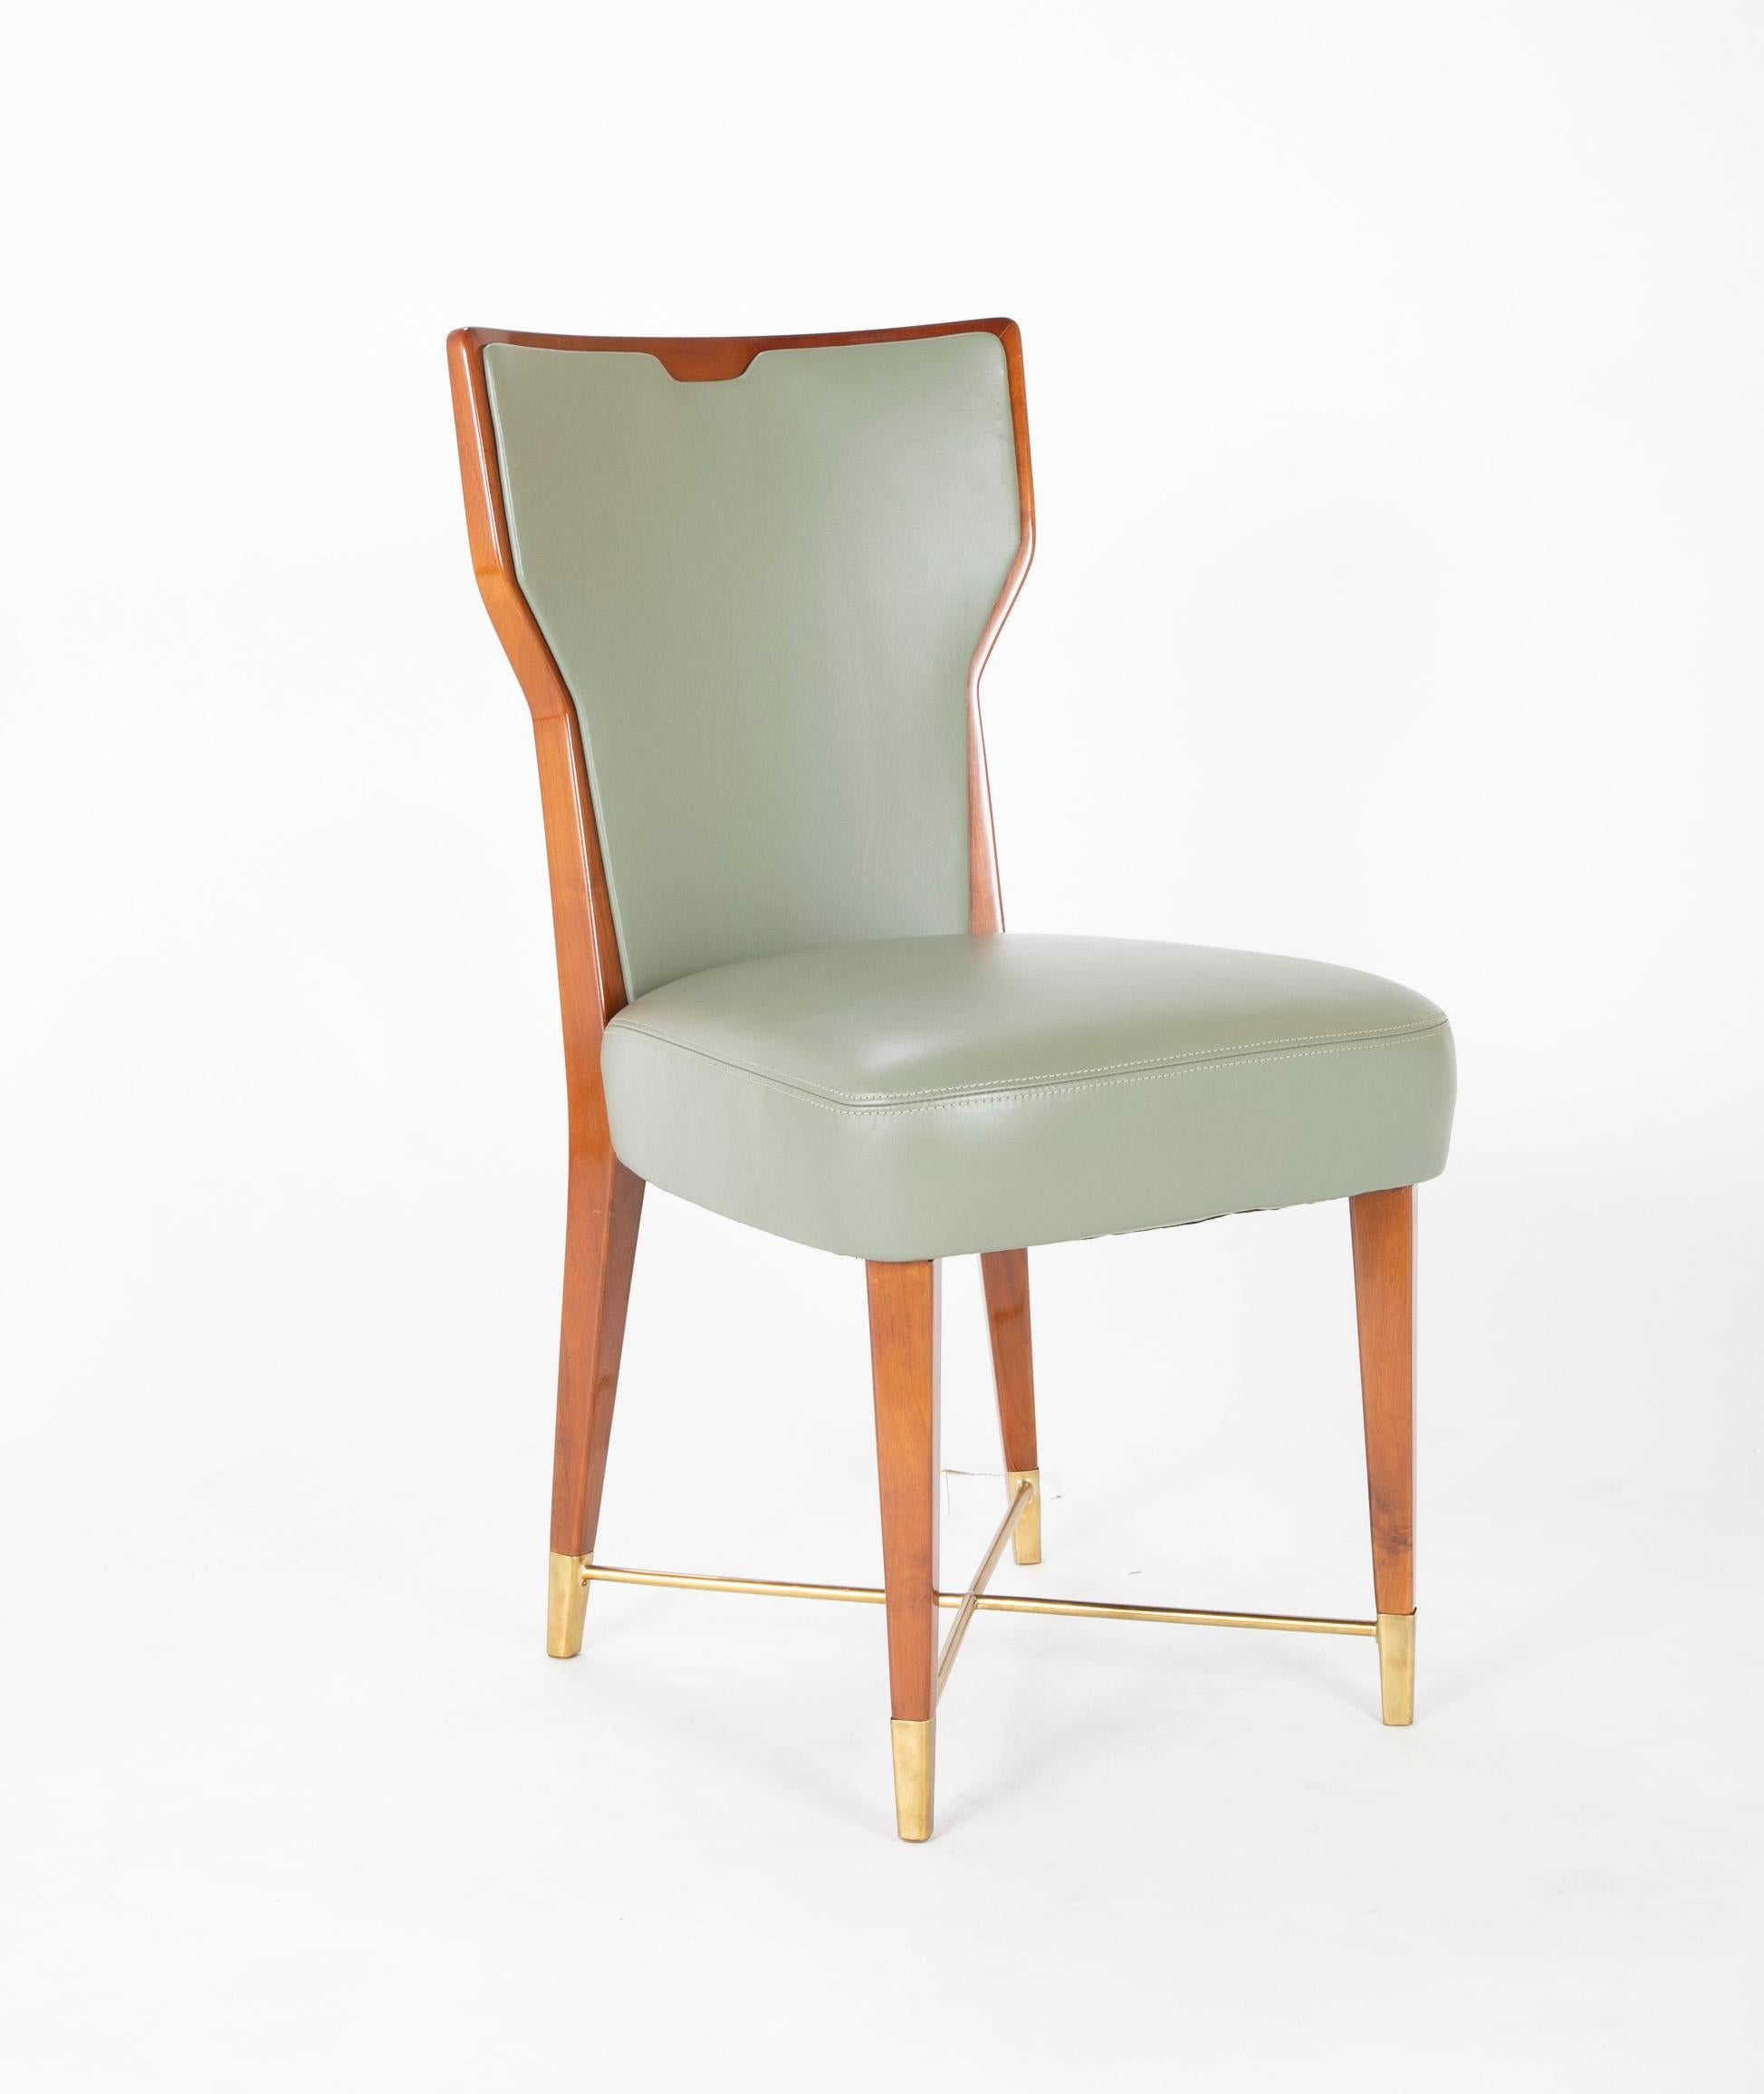 Giorgio Ramponi designed dining chairs. Leather covered mahogany with brass stretcher in a satin finish. 

Literature- A similar model can be seen in Domus, July-August 1950, no. 248-49, back cover.